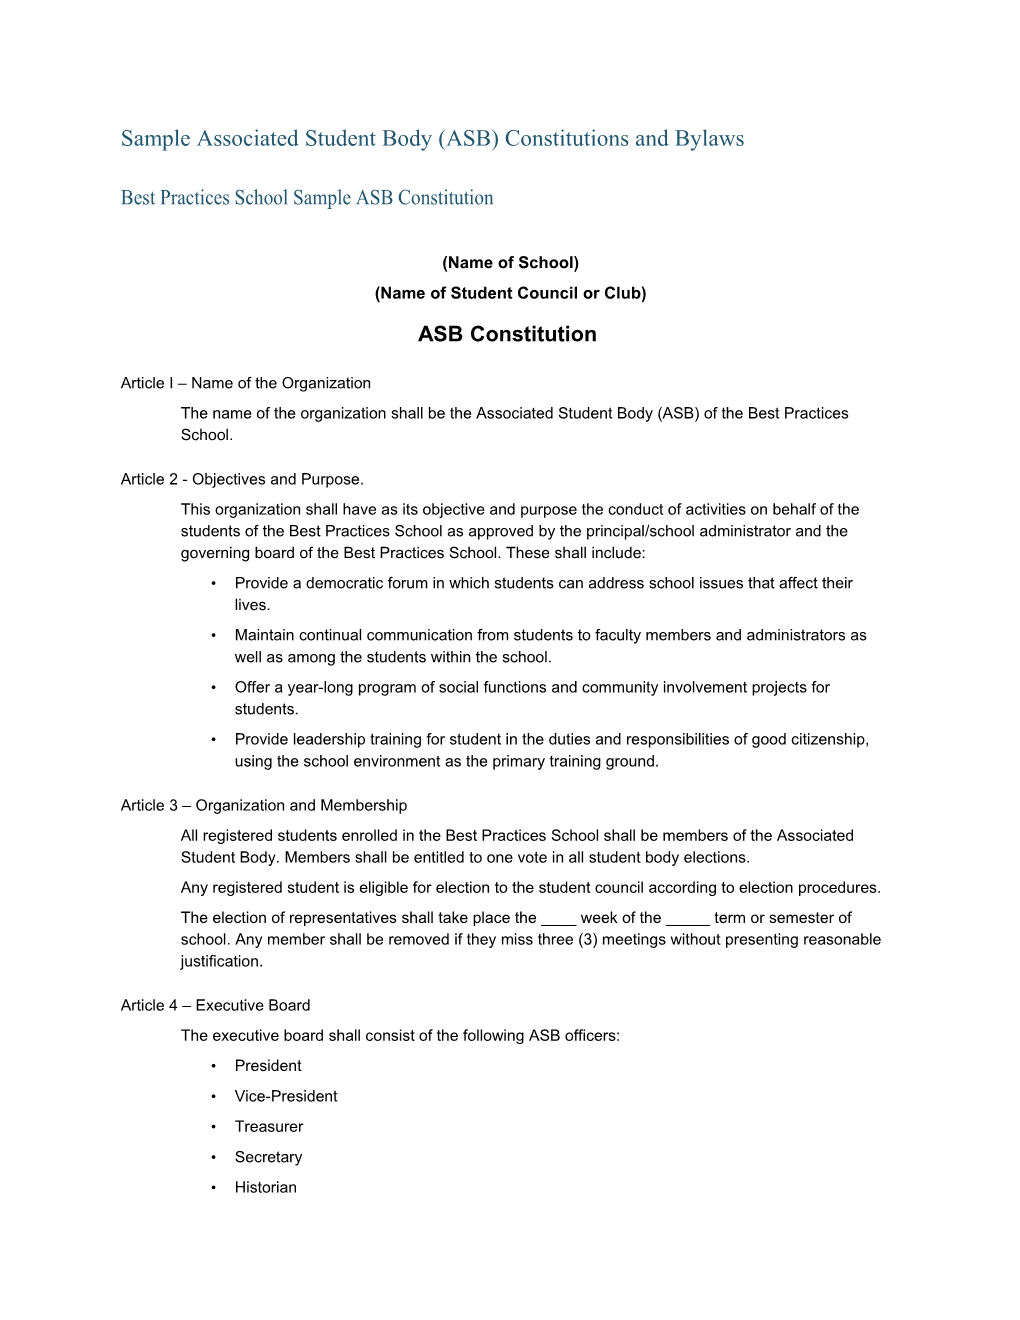 Sample Associated Student Body (ASB) Constitutions and Bylaws